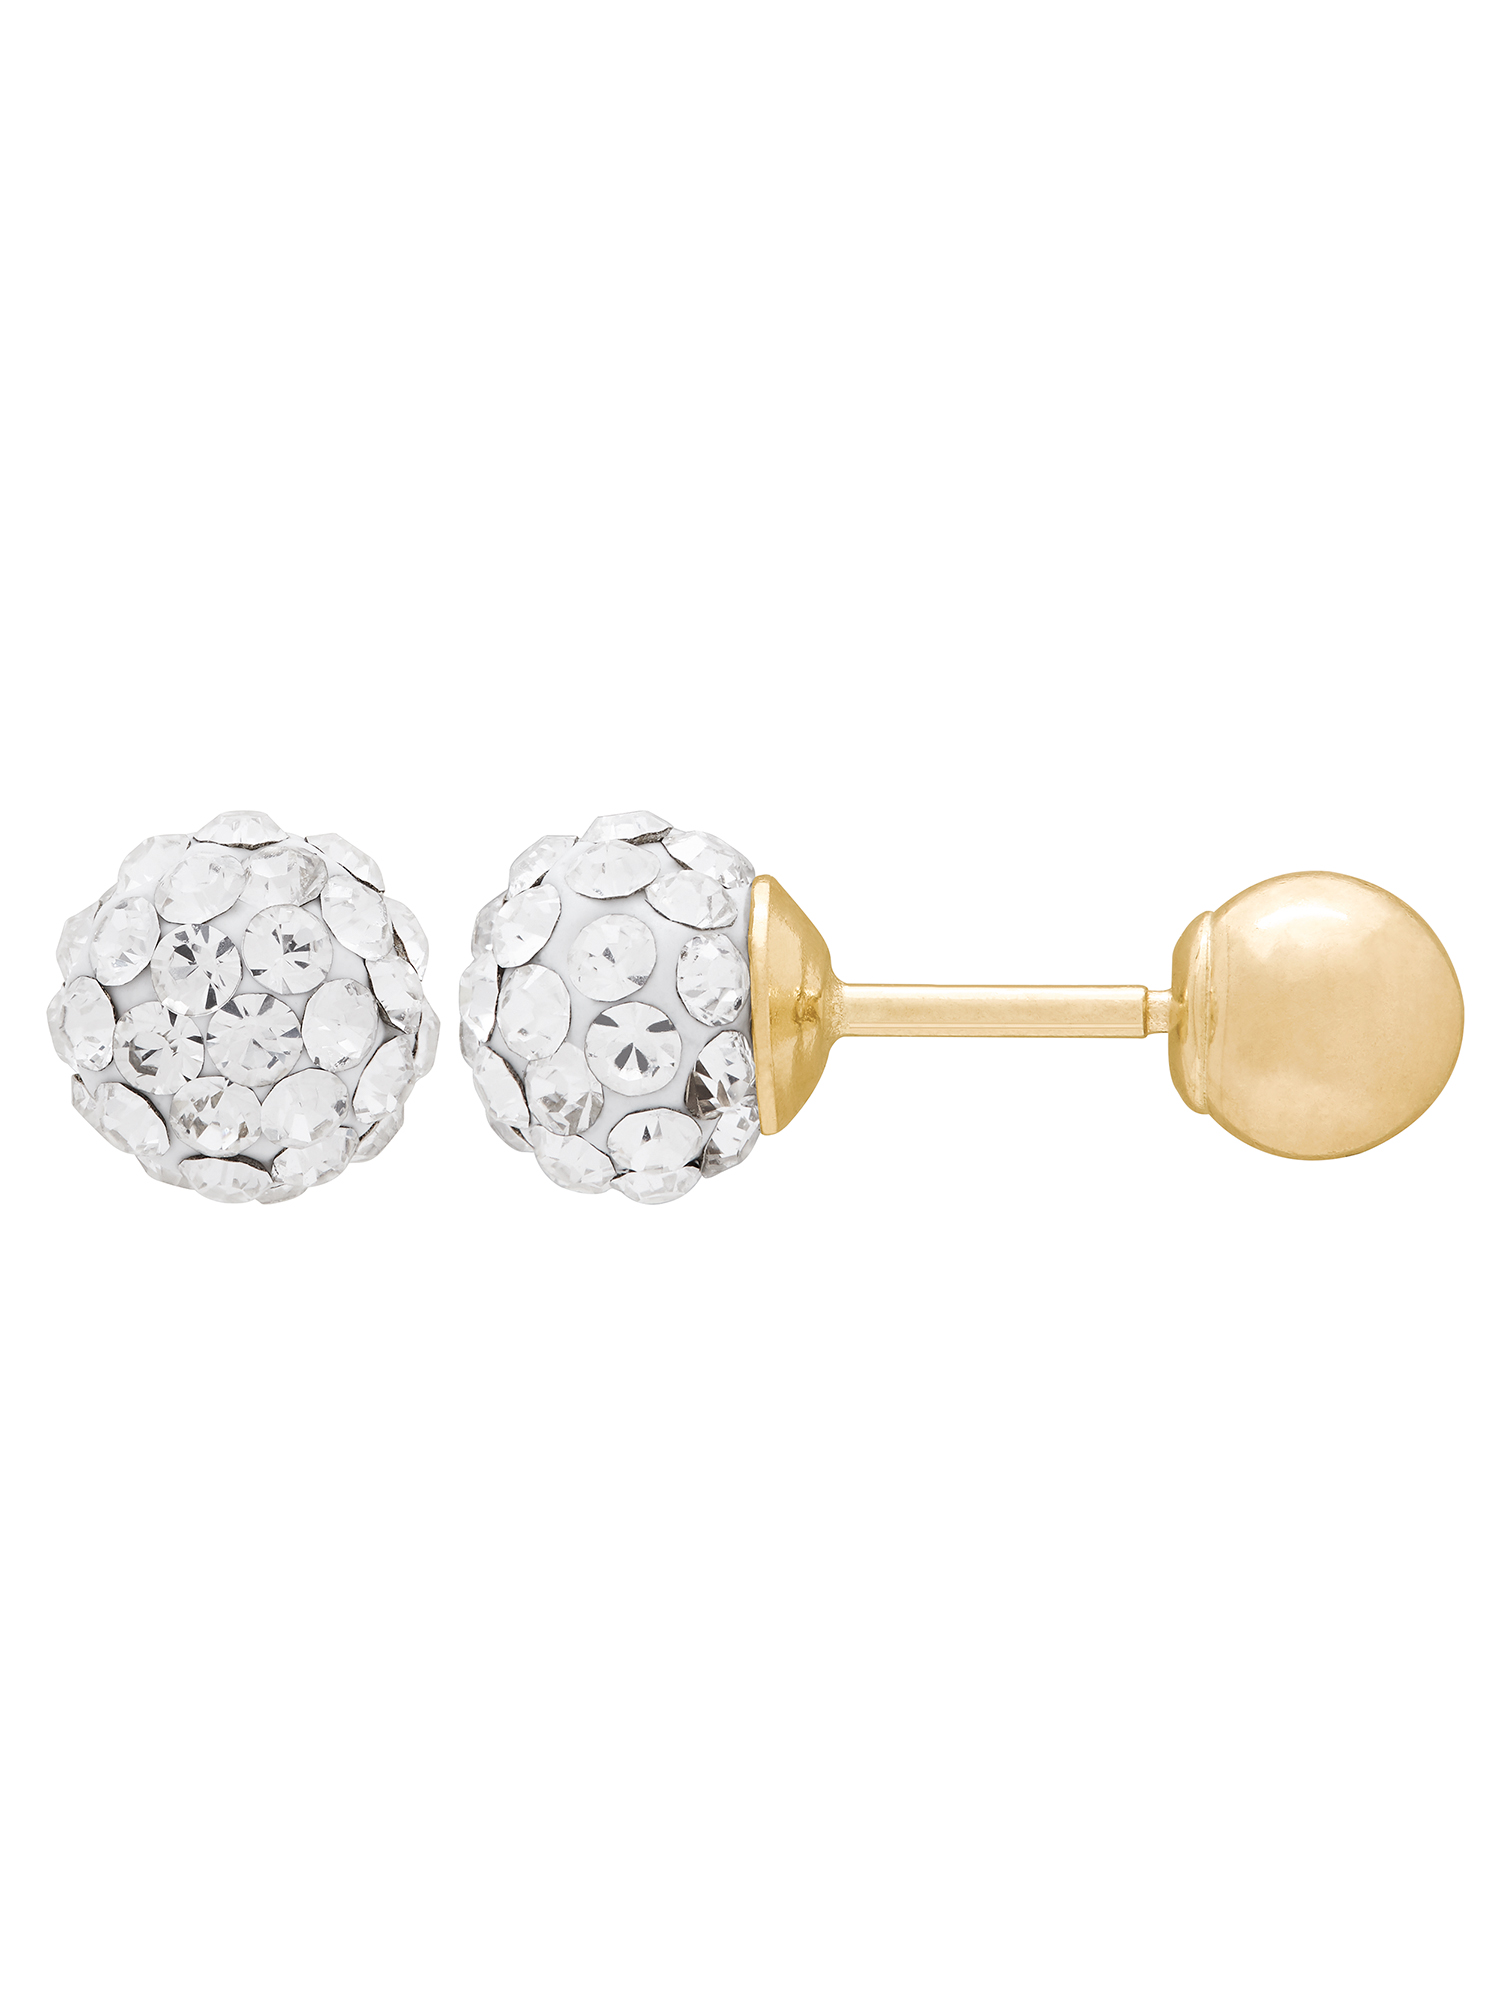 Brilliance Fine Jewelry White Crystals 4.8MM Studs in 10K Yellow Gold Earrings - image 1 of 4